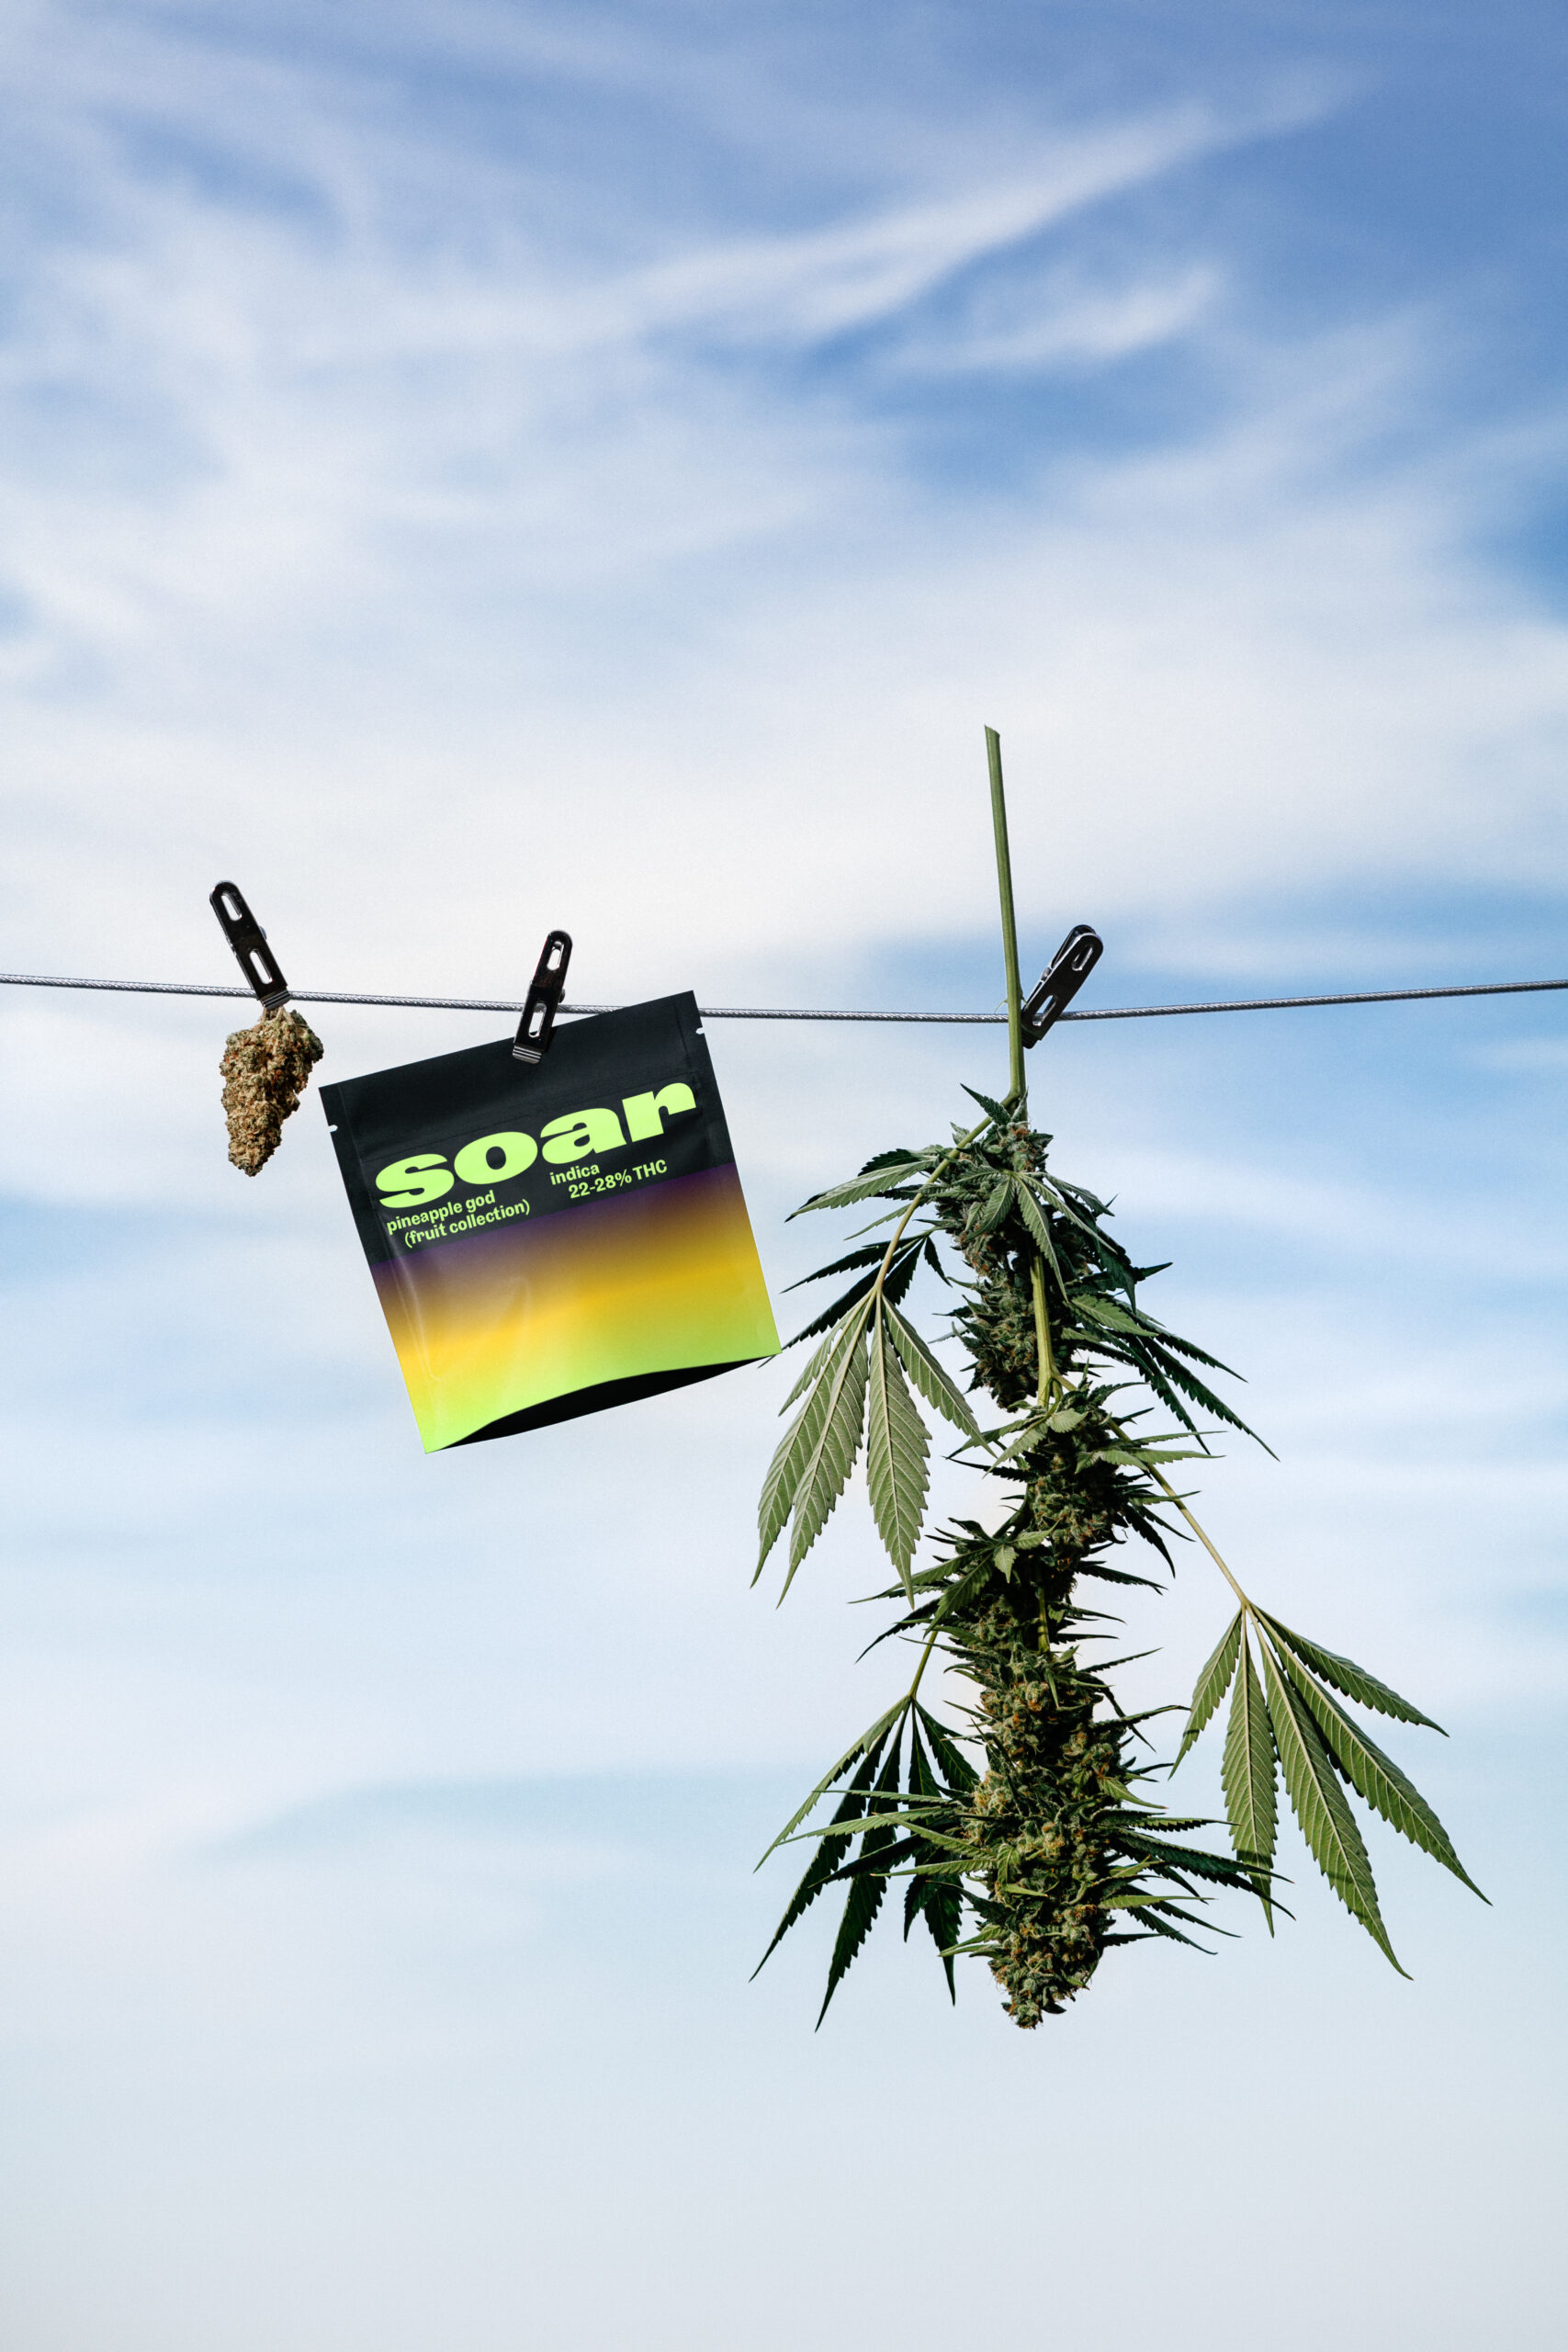 Pure Sunfarms introduces Soar, a cannabis brand reaching new heights.